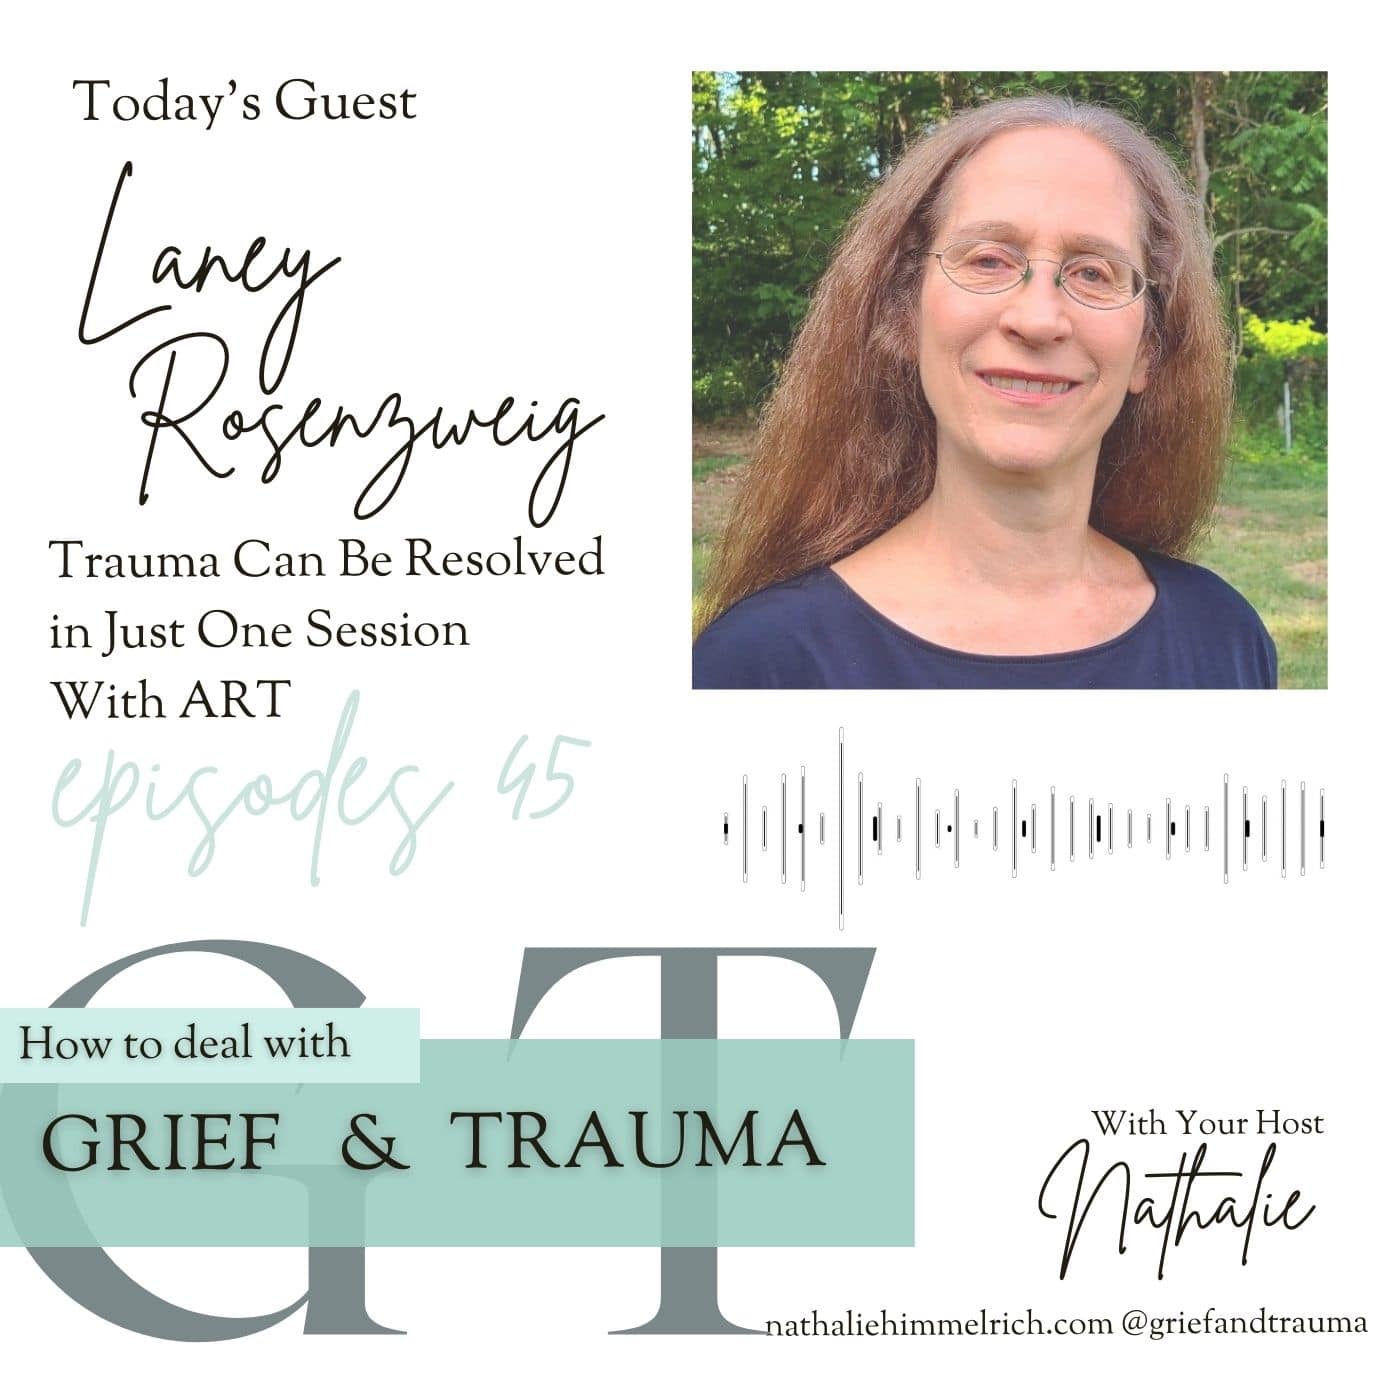 45 Laney Rosenzweig: How Trauma Can Be Resolved in Just One Session With ART